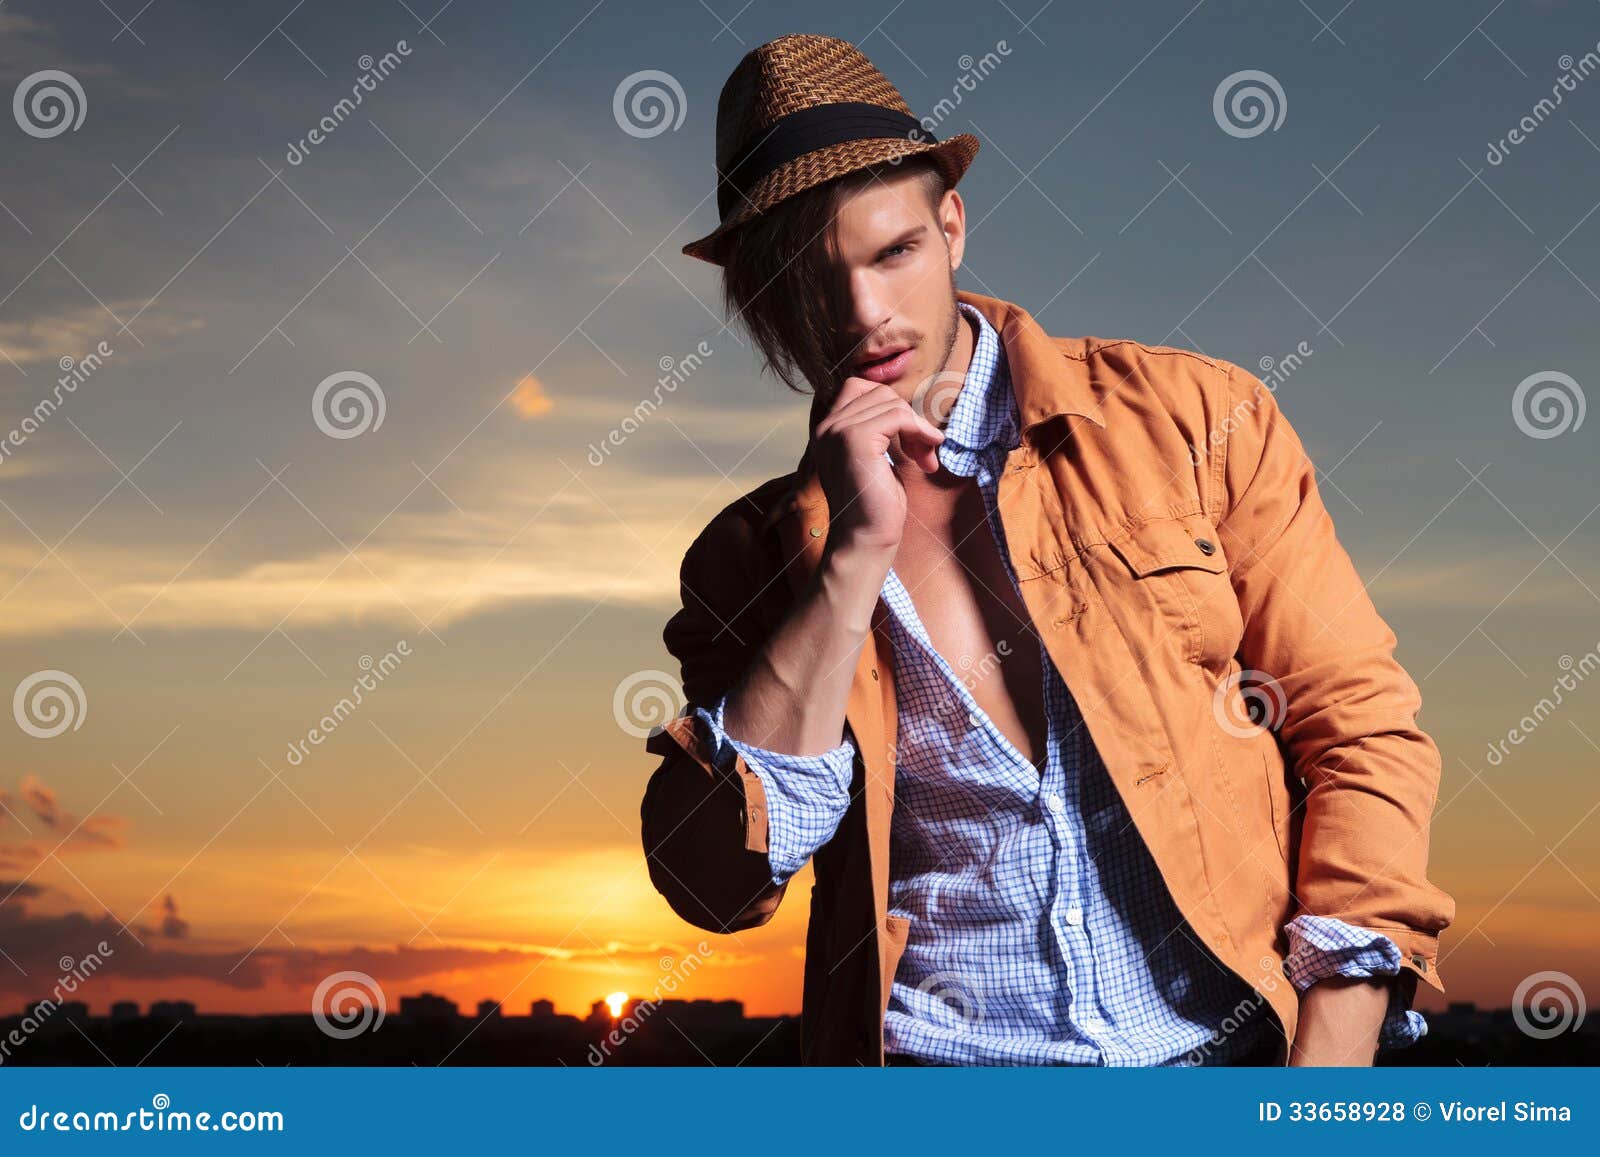 Casual Man In The Sunset Pulling His Hair Royalty Free Stock Photos ...